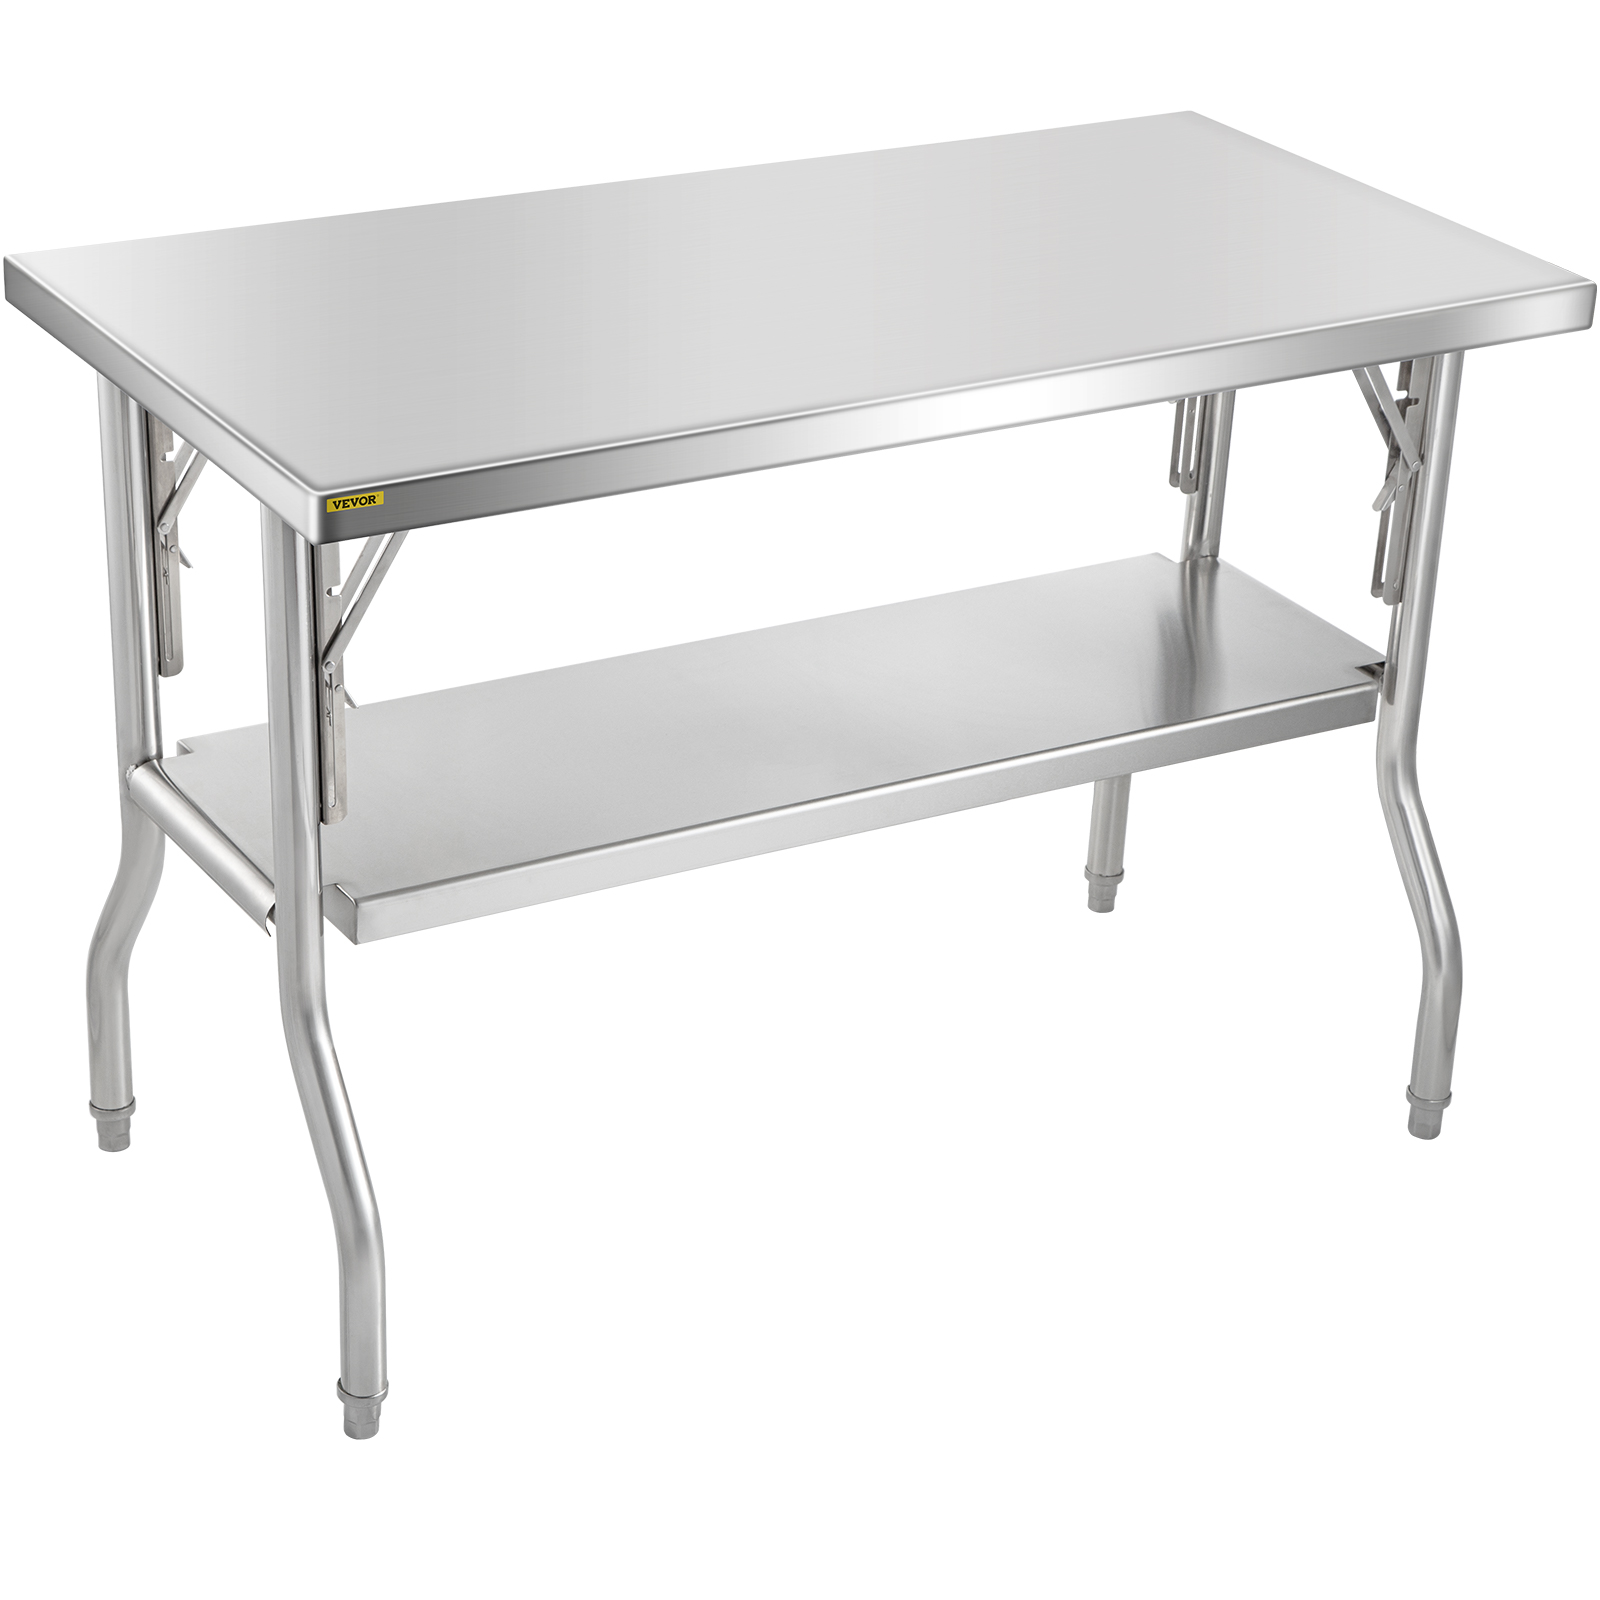 Vevor Stainless Steel Folding Commercial Prep Table With Undershelf -48 X 24 In. от Vevor Many GEOs